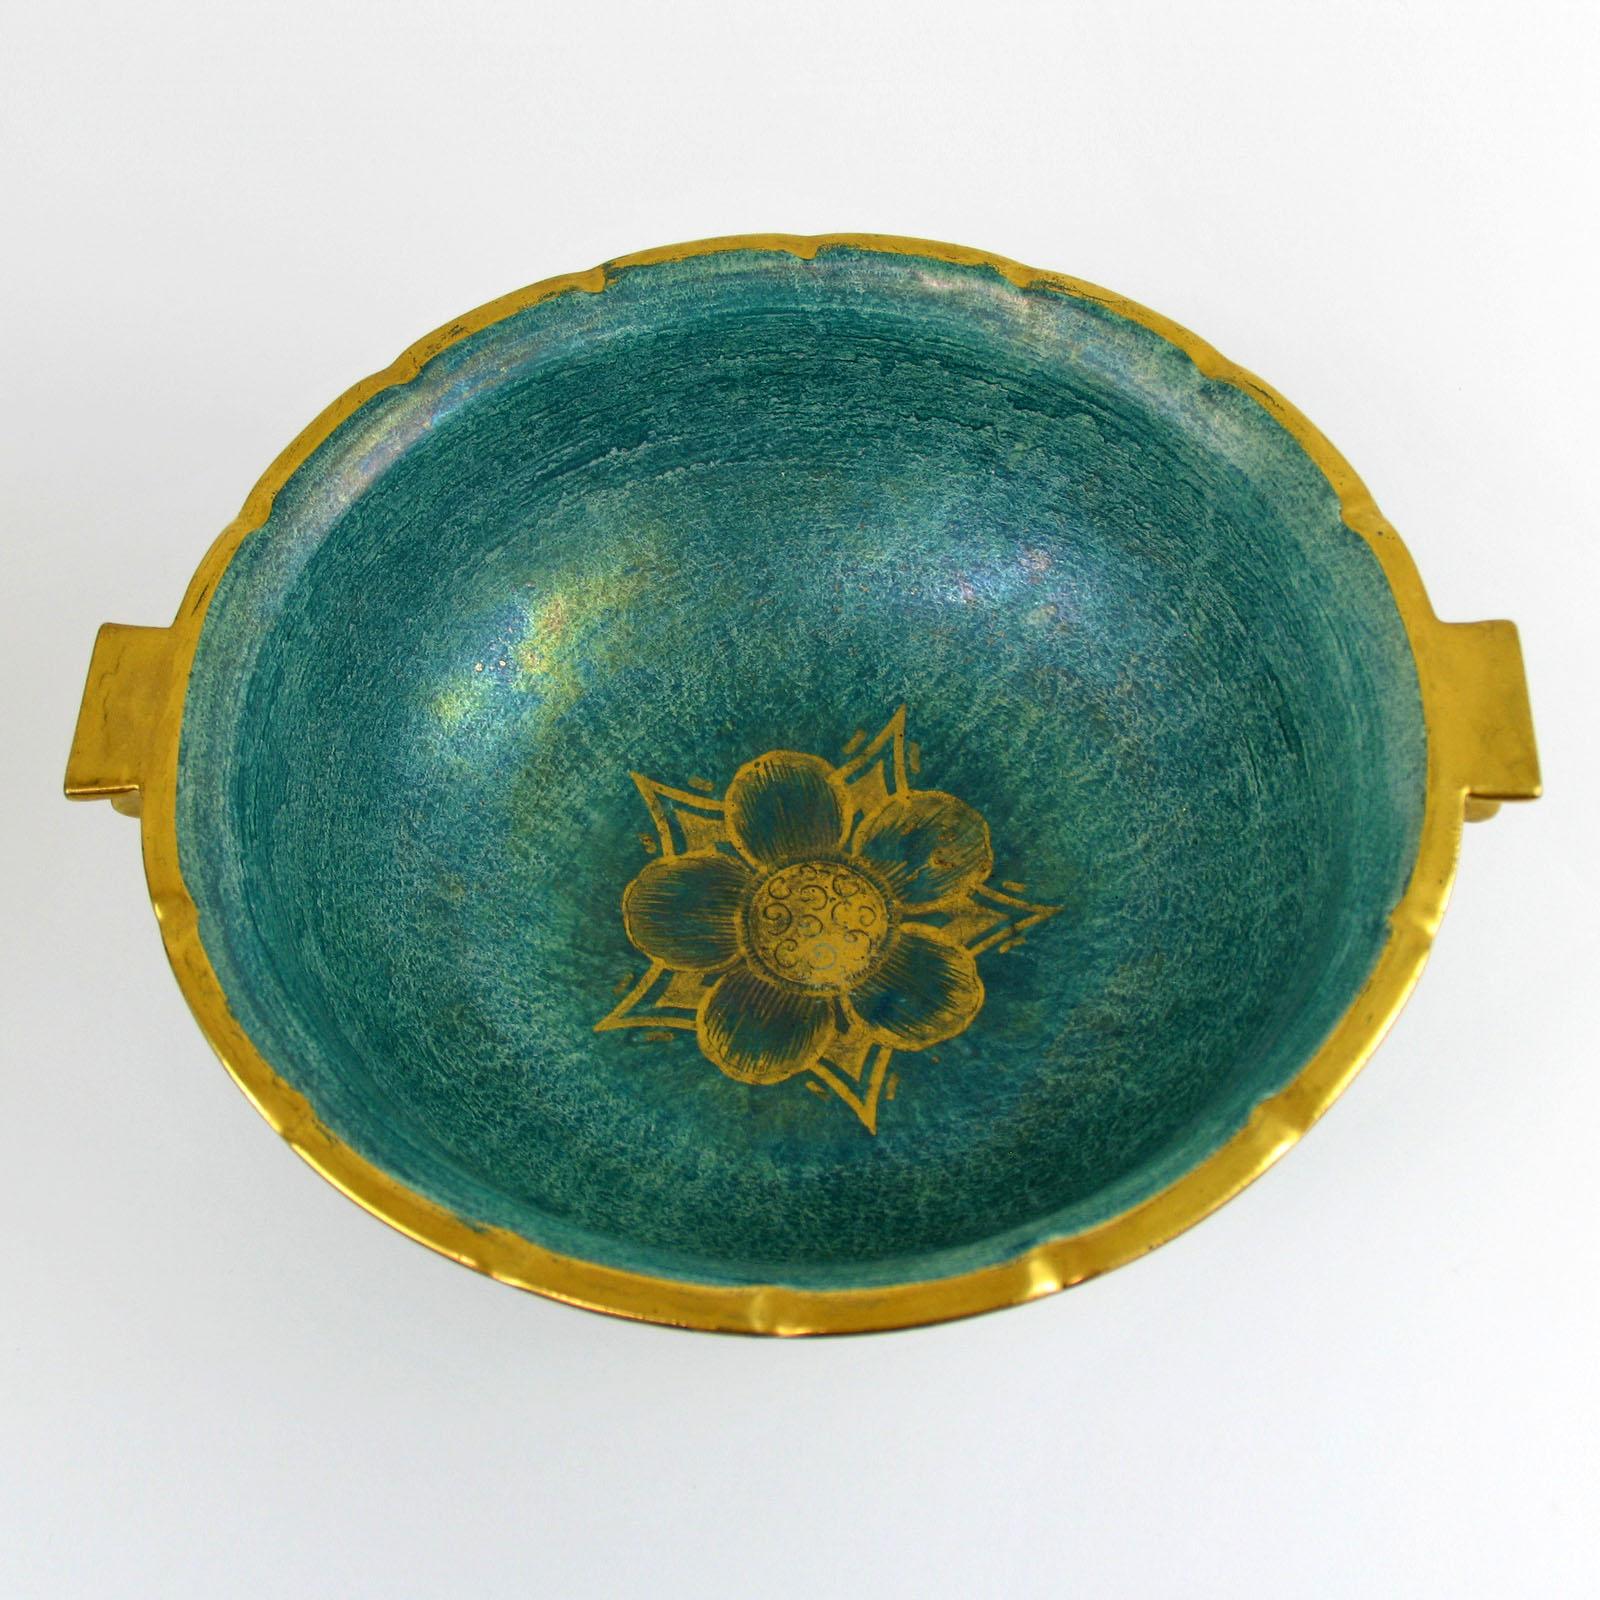 Mid-20th Century Josef Ekberg Green and Gold Ceramic Footed Bowl, Gustavsberg, Sweden 1930s For Sale